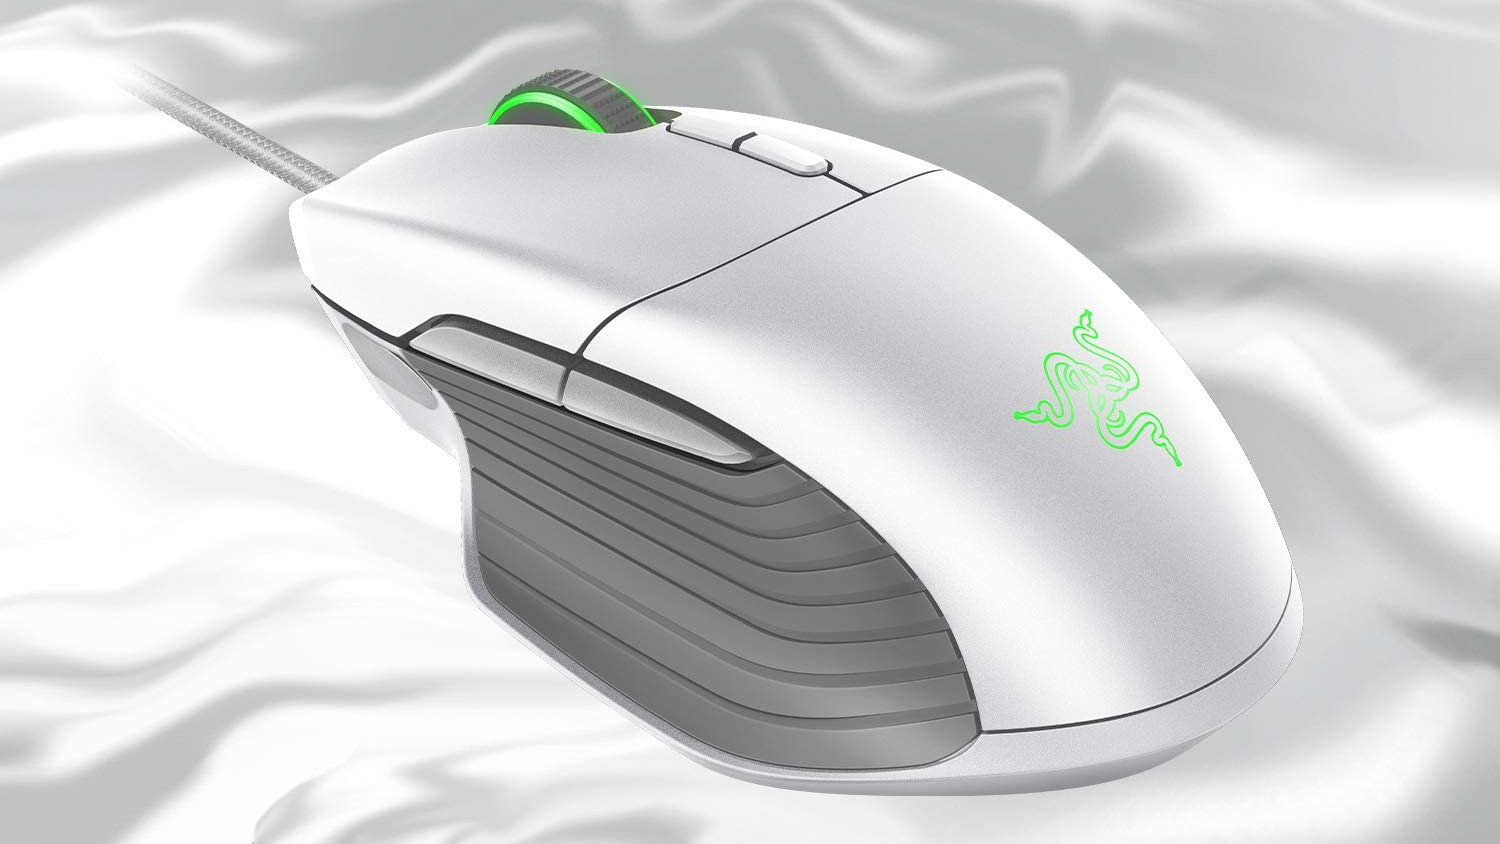  Get the Razer Basilisk gaming mouse for just $40 right now 